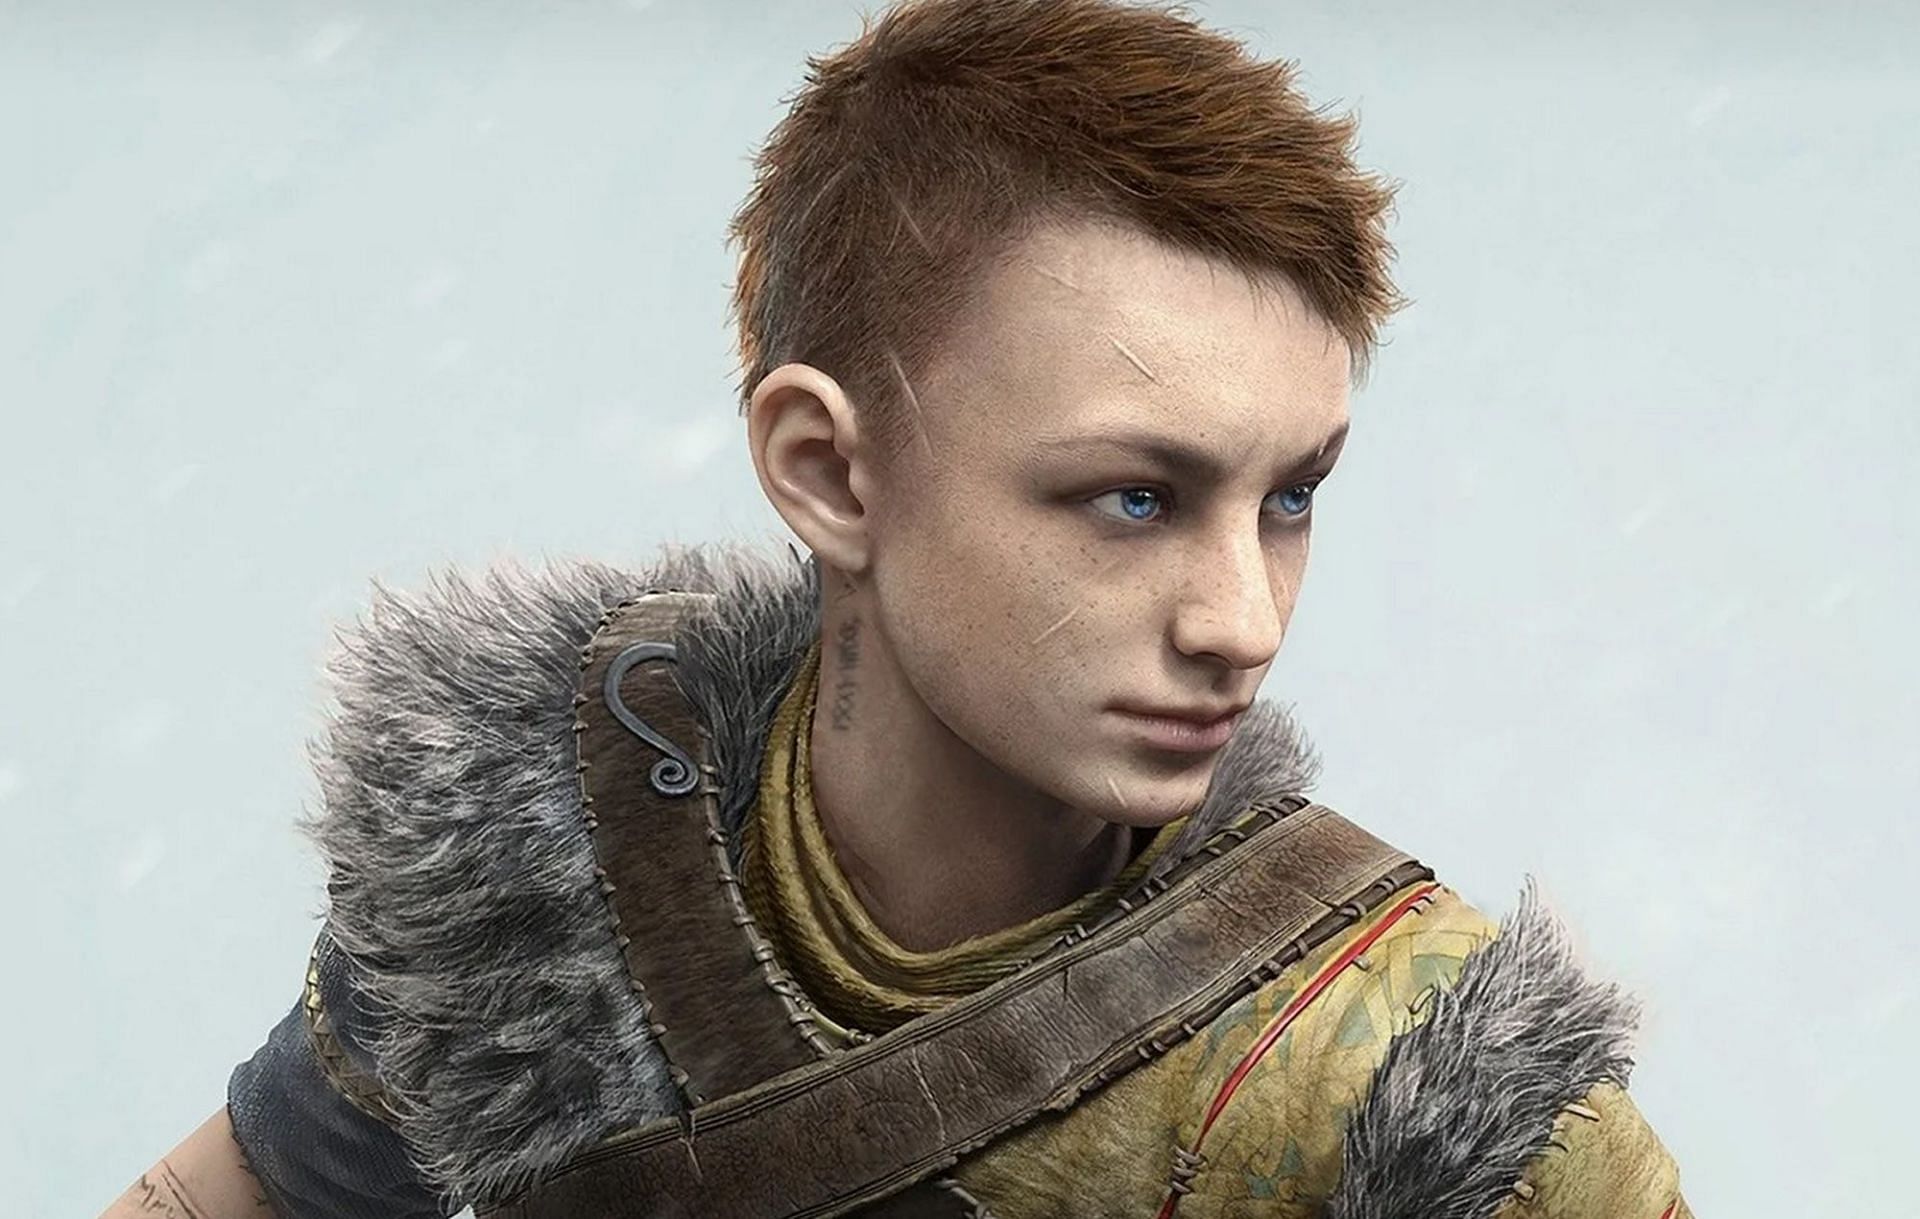 While Atreus and Loki share some similarities, they also have distinct differences that make them unique characters (Sony Interactive Entertainment)